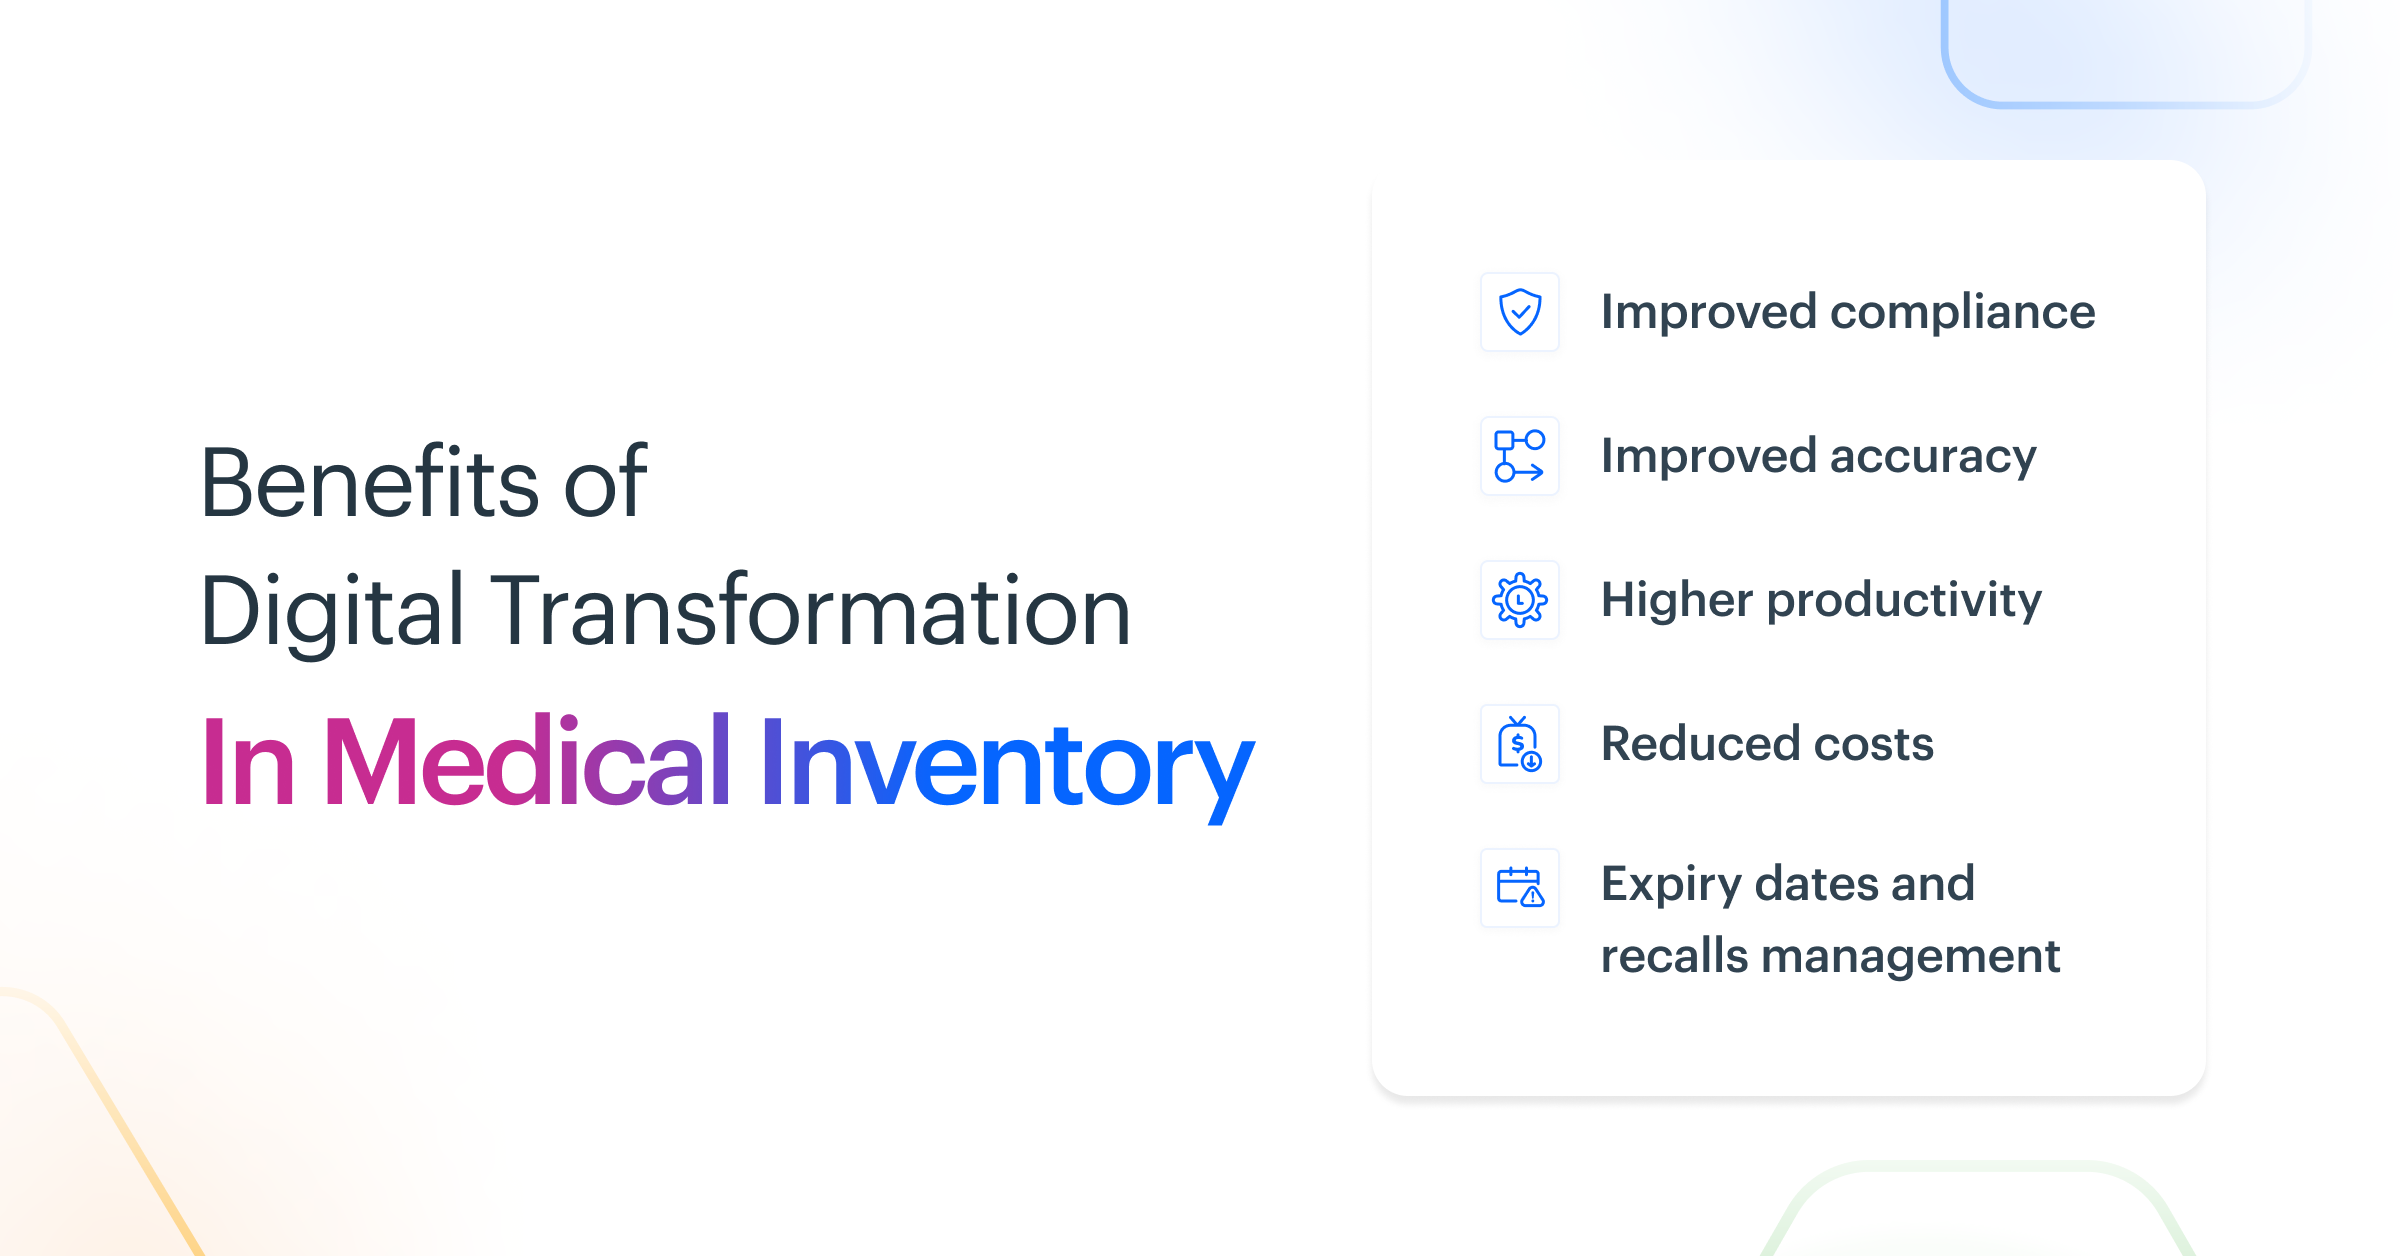 Benefits of Digital Transformation in Medical Inventory